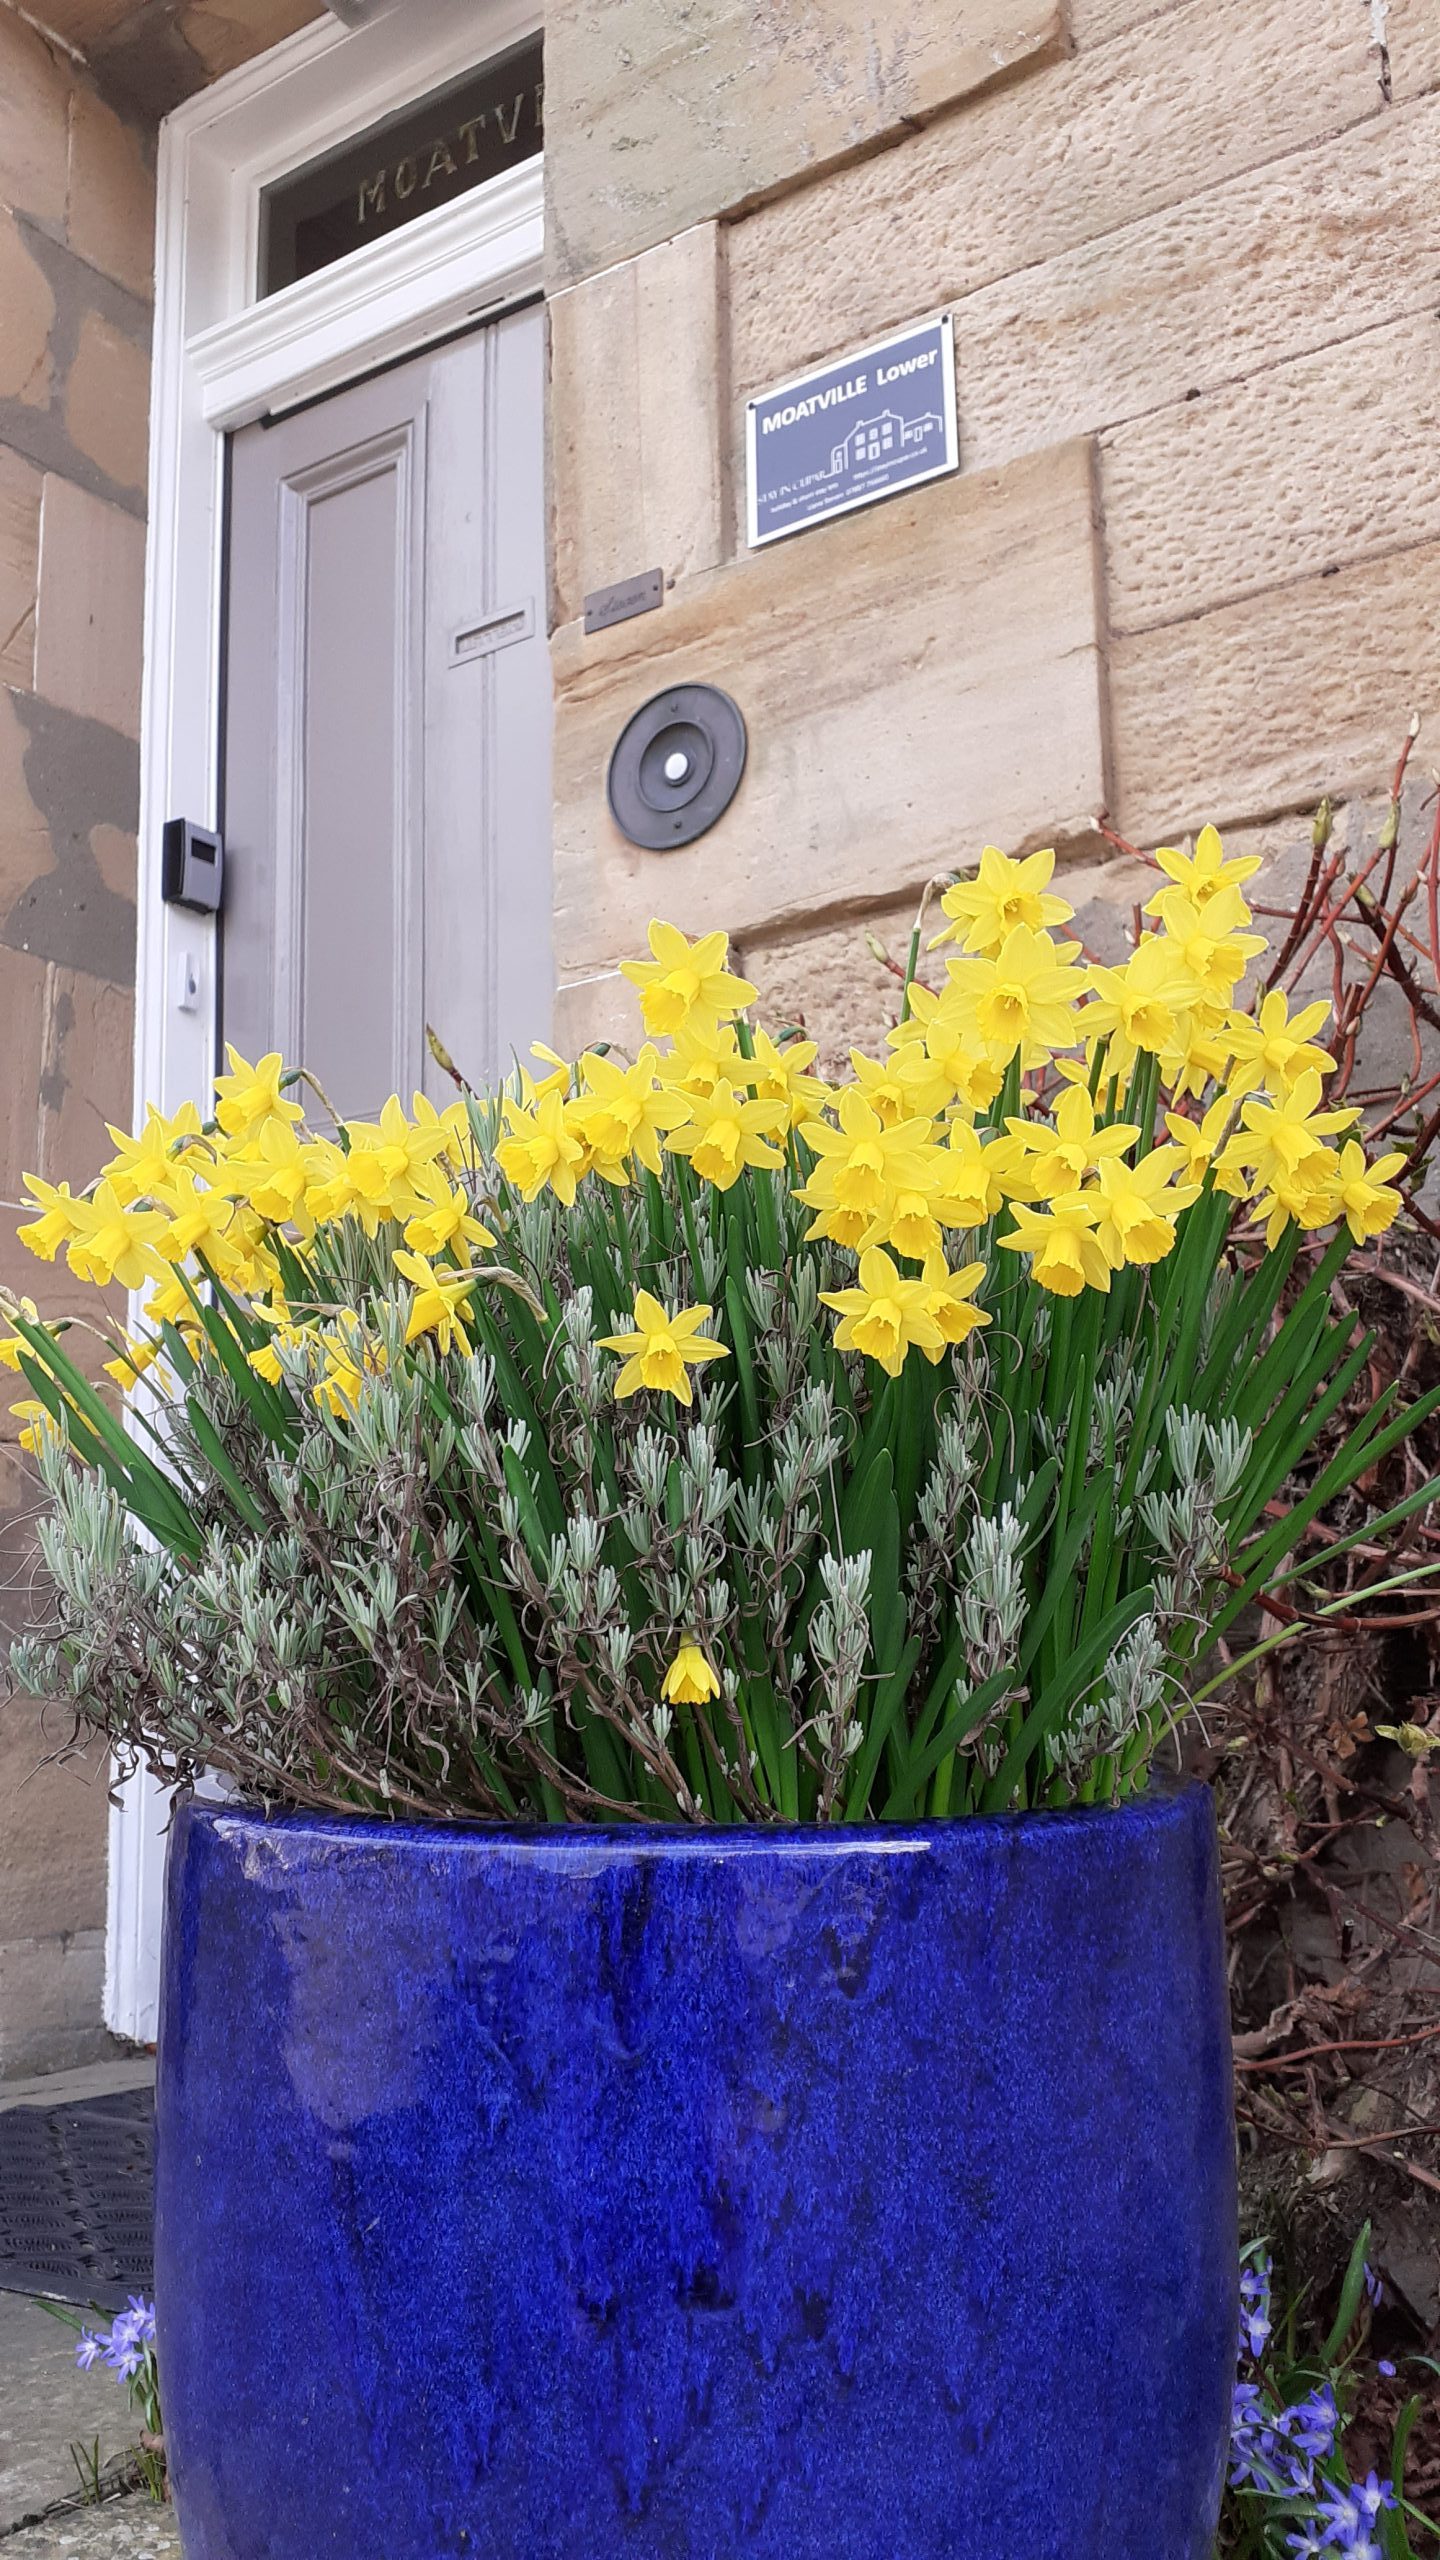 Moatville Lower front door with keysafe and spring daffodils in blue pot